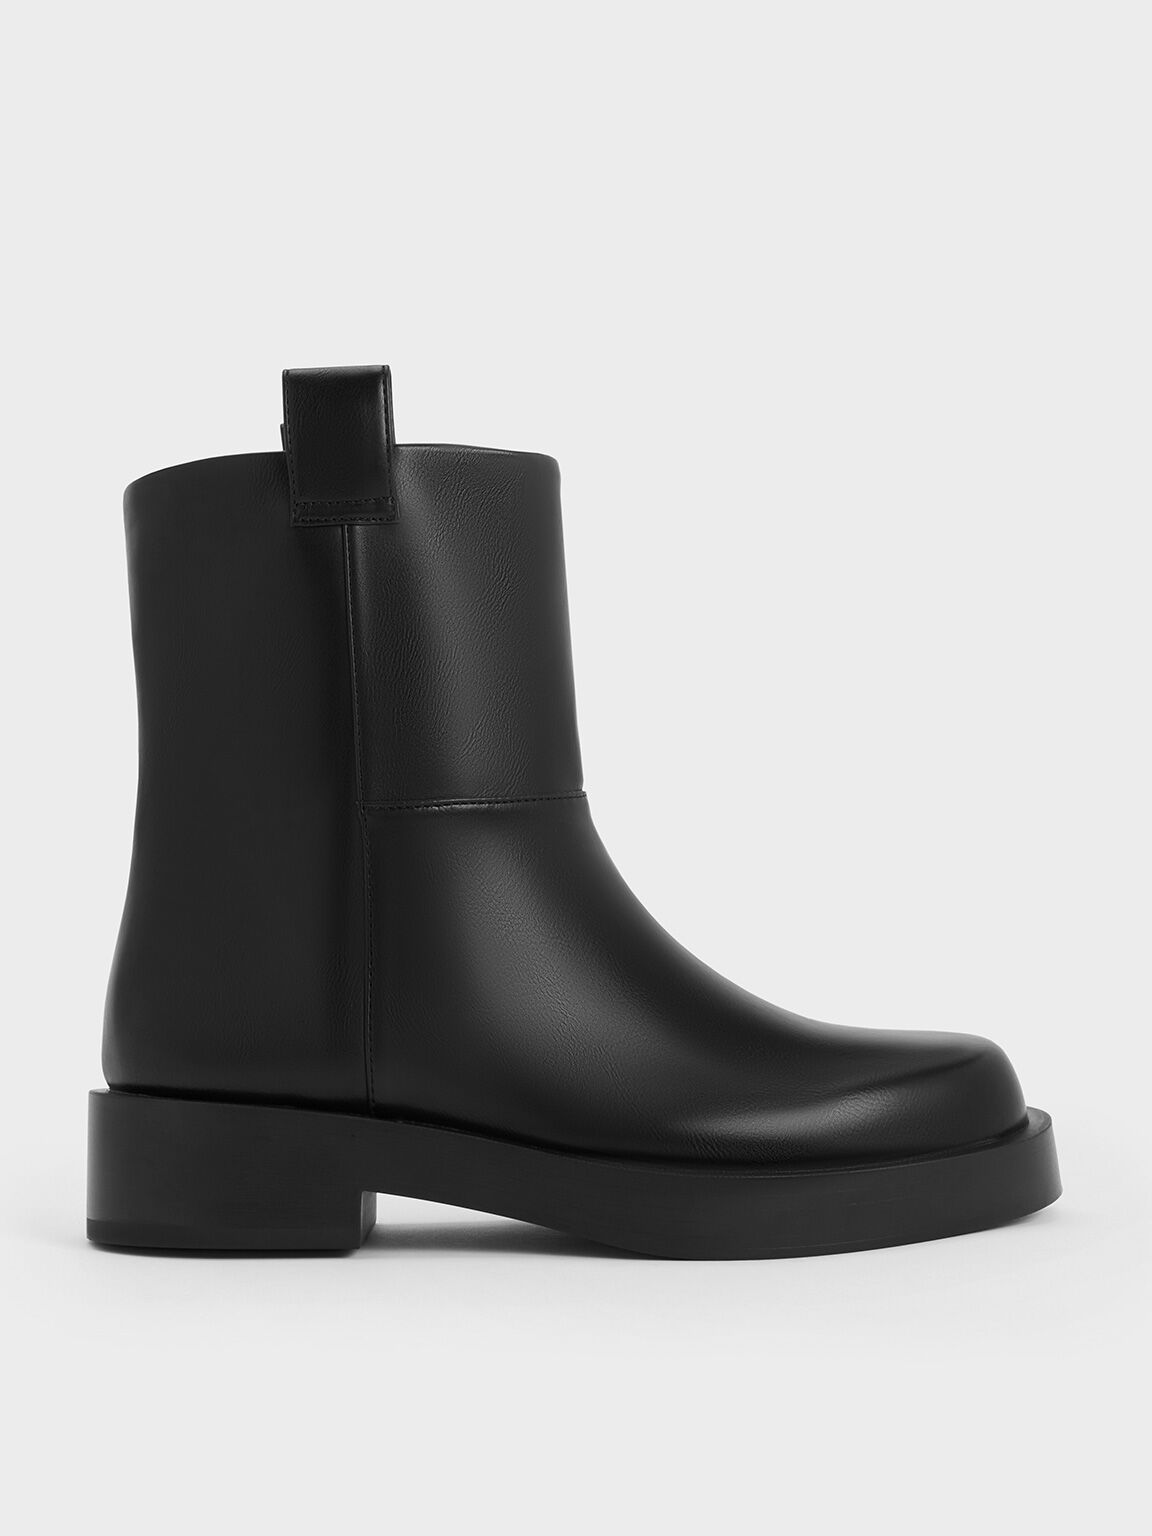 Double Pull-Tab Ankle Boots, Black, hi-res